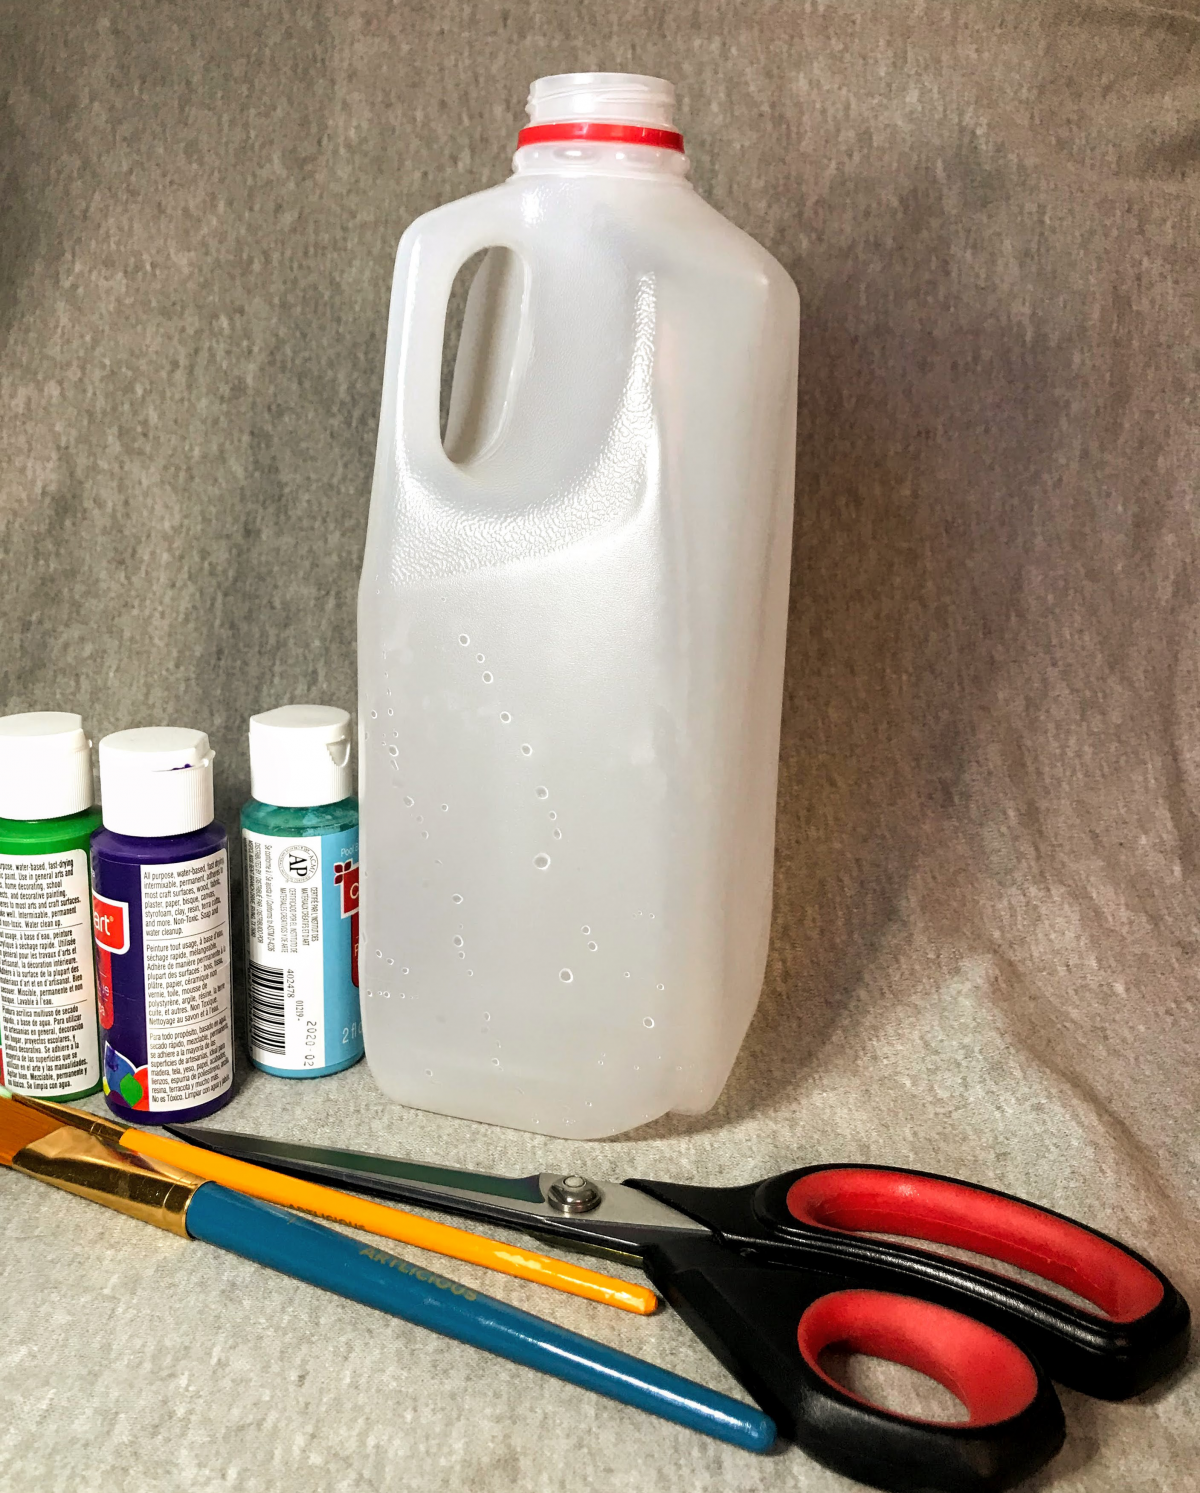 A grouping of supplies: milk jug, paint, and scissors